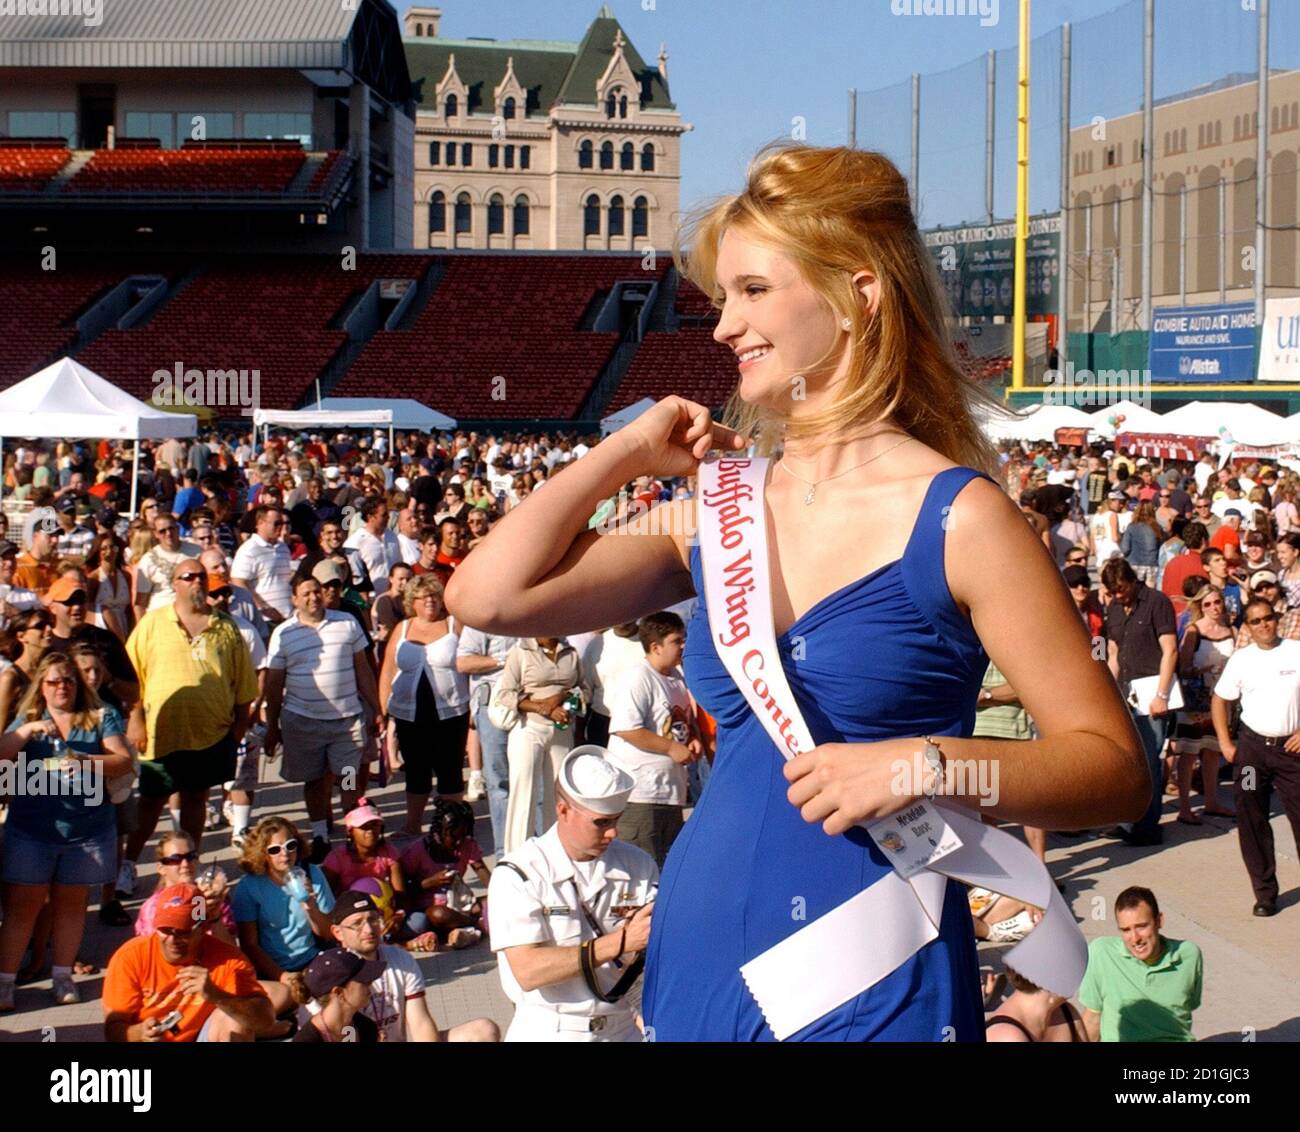 Meagan Rose Elliott prepares for the Miss Buffalo Wing beauty pageant during the National Chicken Wing Festival in Buffalo, New York August 30, 2008. Wiepert STATES Stock Photo - Alamy